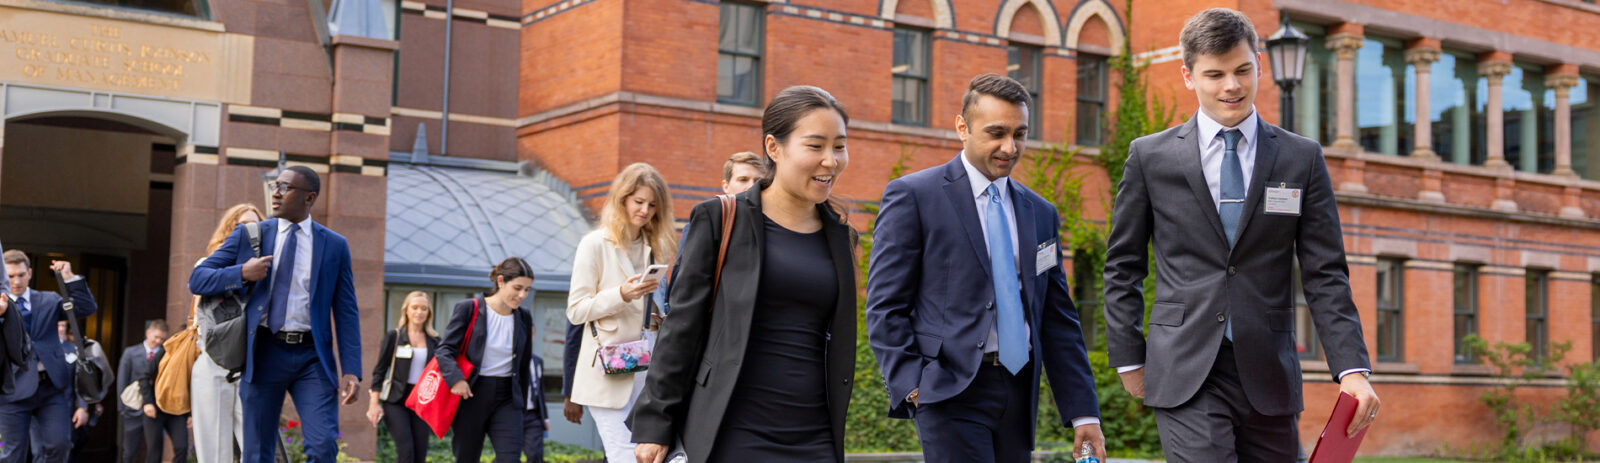 Students in business attire walk across the road with Sage Hall in the background.